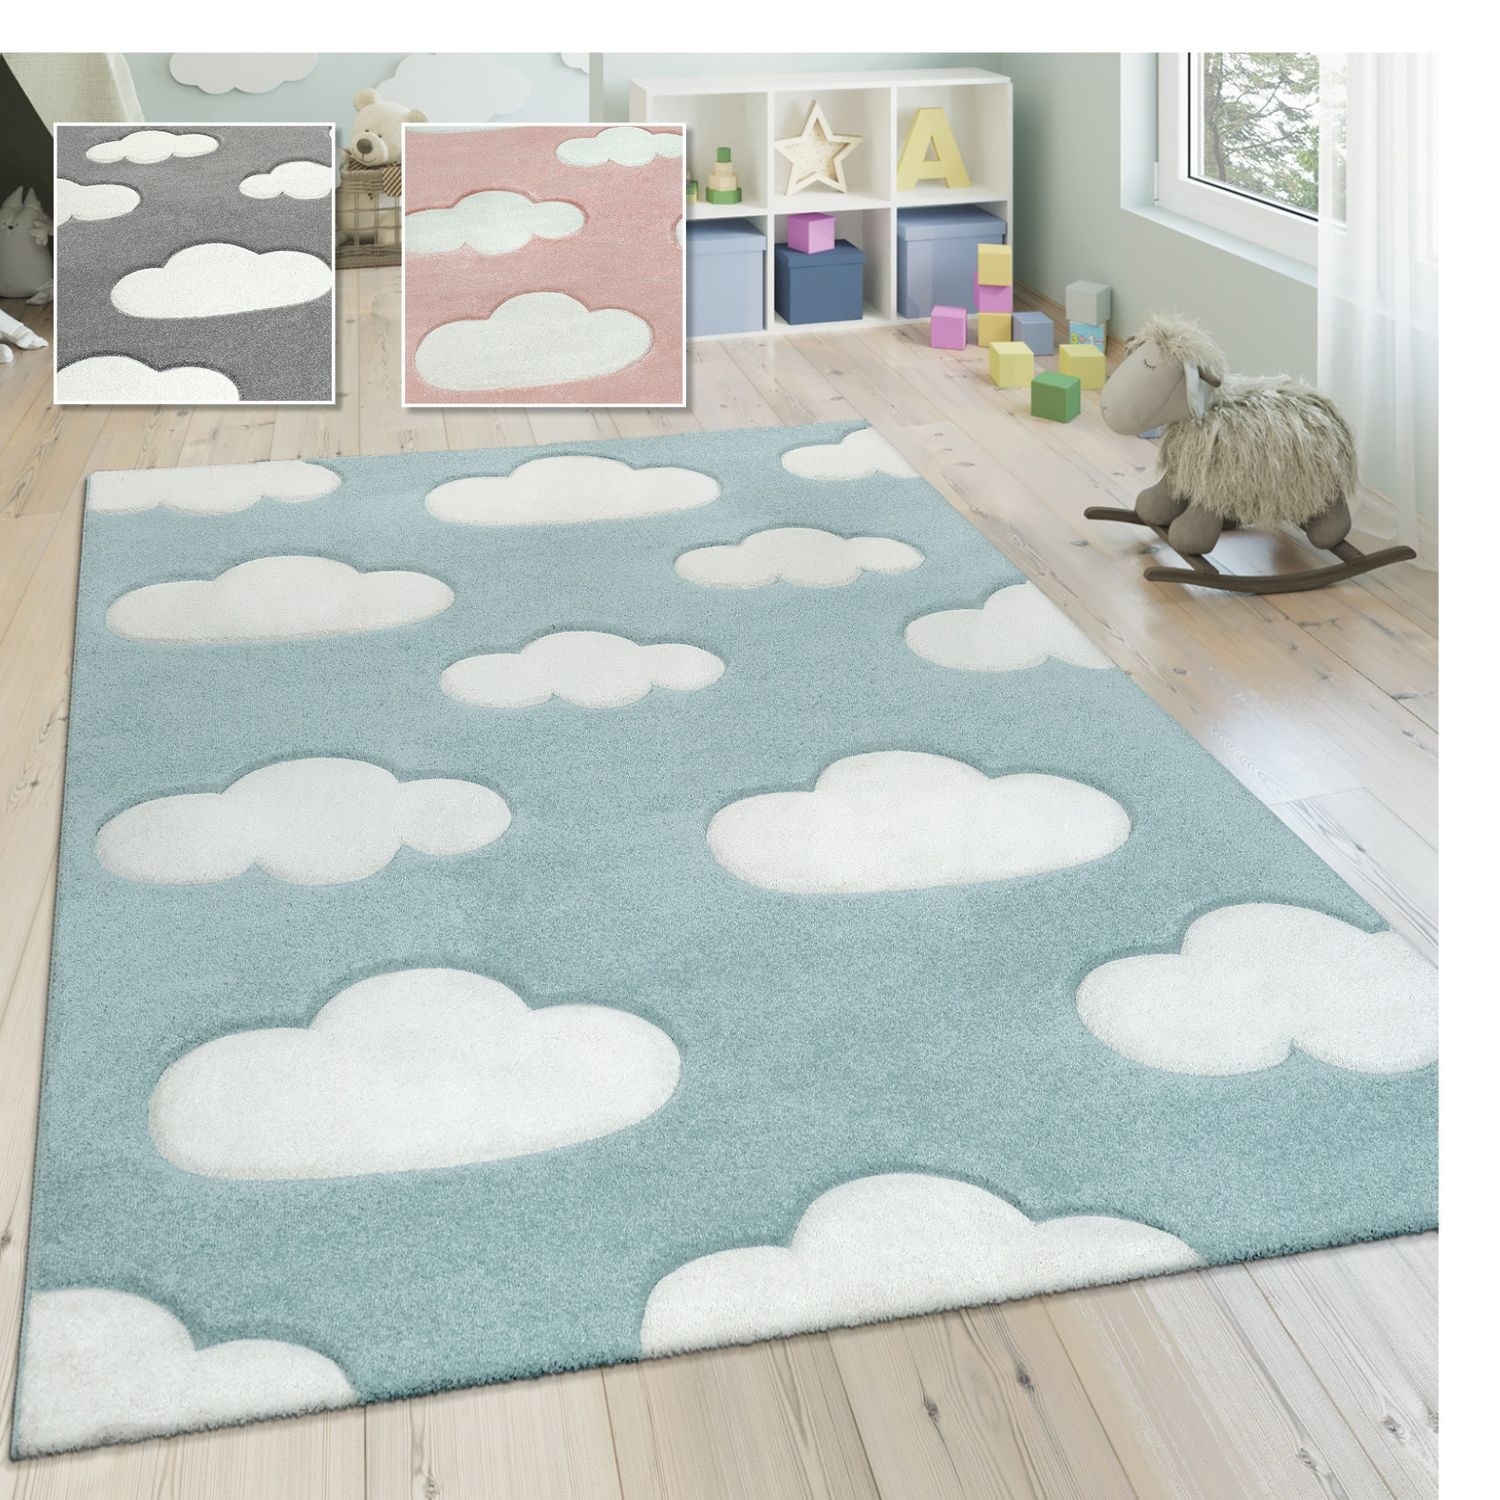 Kids Rug with Clouds in Pastel Colors for Children's Room or Nursery - On  Sale - Bed Bath & Beyond - 35086457